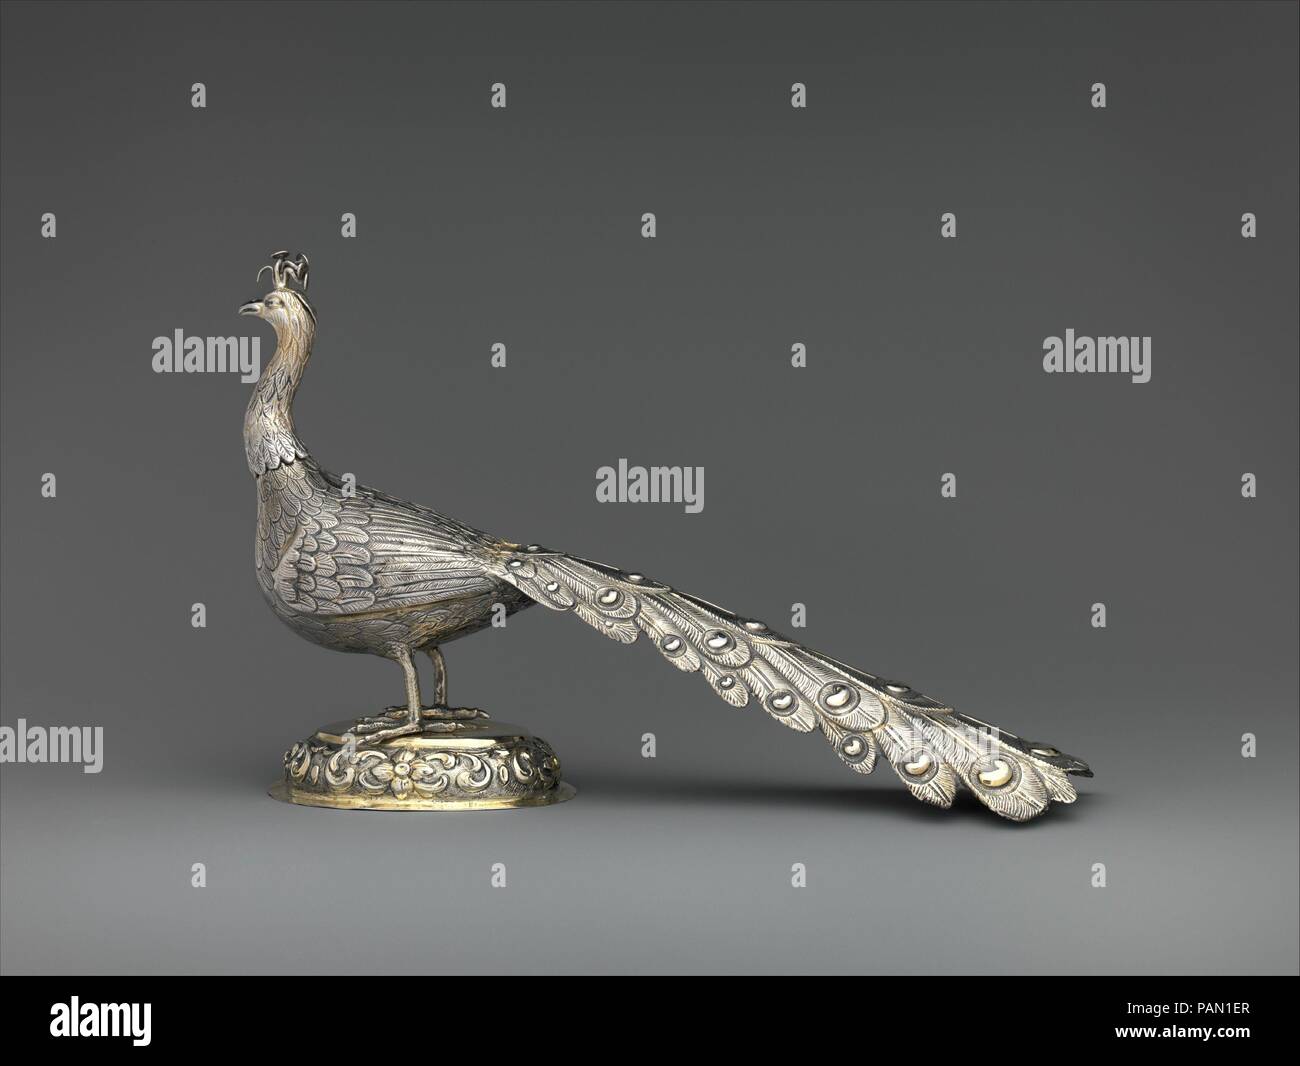 Table decoration in the form of a peacock. Culture: Hungarian, Munkács. Dimensions: Overall: 7 3/16 x 12 in. (18.3 x 30.5 cm). Date: 1787.  The peacock stands with its head slightly tilted, mischievously observing his surroundings. The artist has capture in silver the temperament and characteristic posture of a mature male peacock, an extremely territorial bird. The object's plain oval base, with its convex frame decorated with Baroque flowers and scrolled leaves, is in sharp contrast to the combination of a terrain plinth and stylized Neoclassical garlands on the stands of the pair of peacock Stock Photo